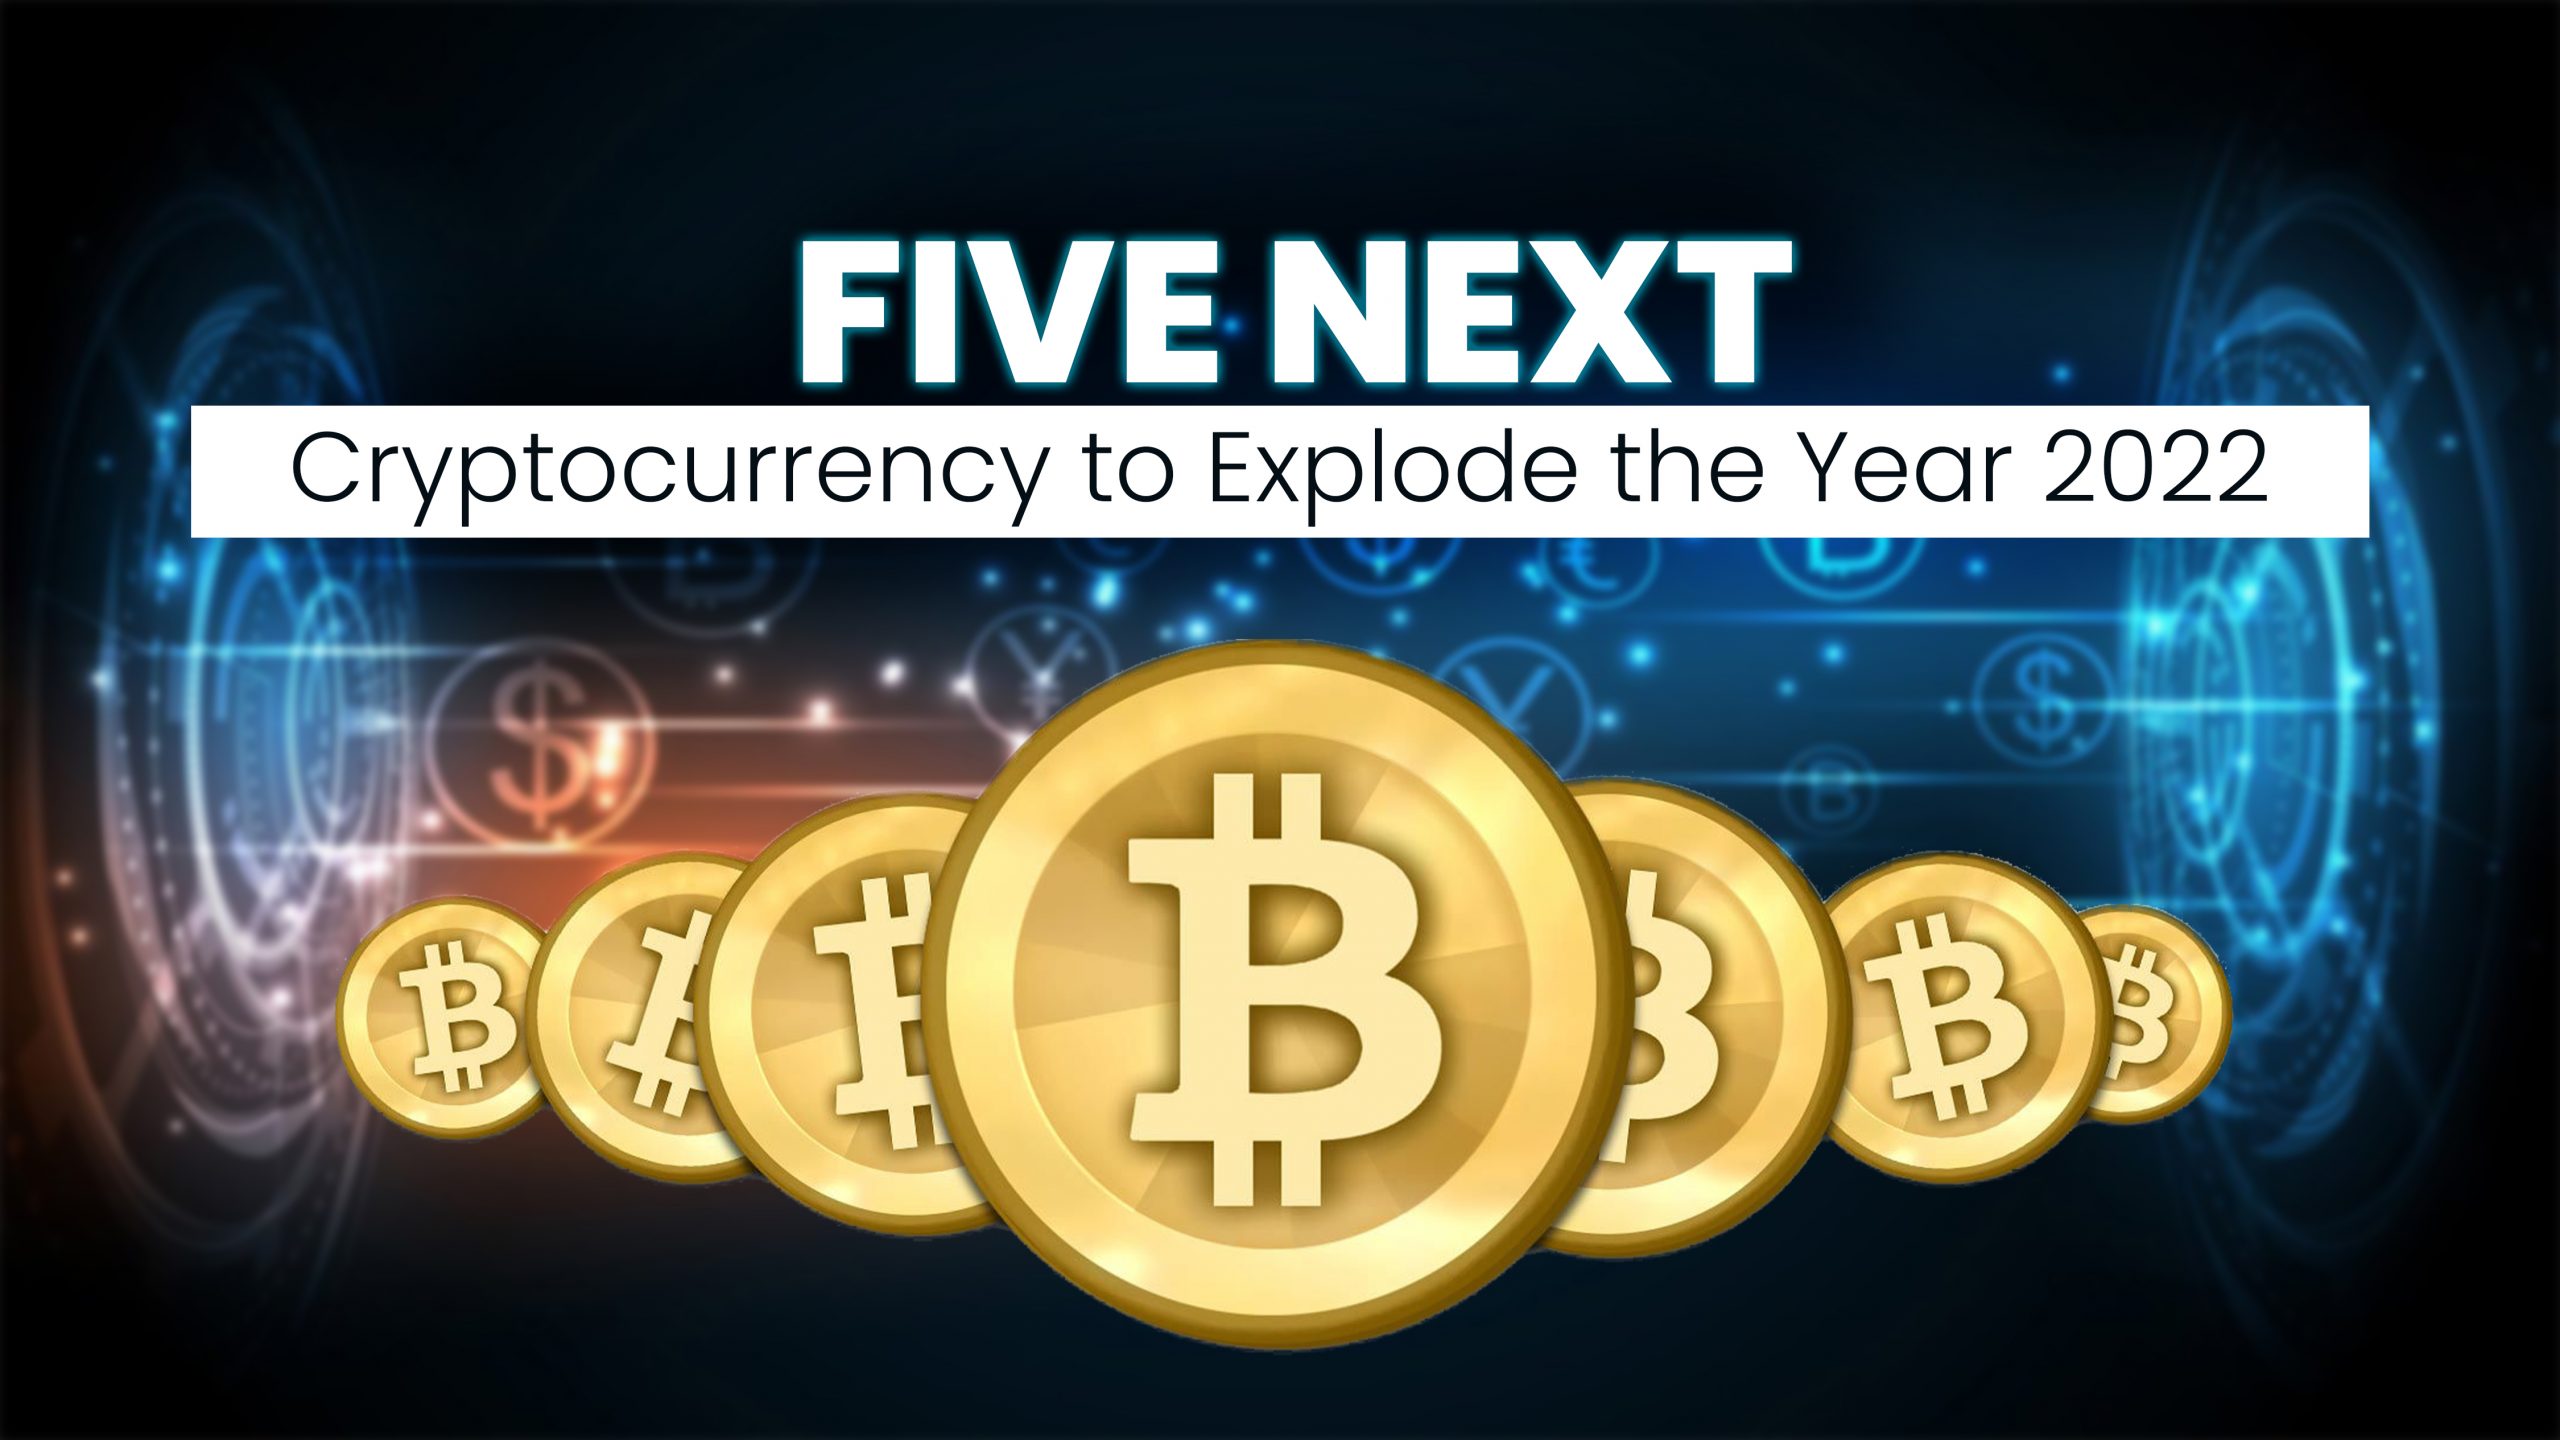 Five Next Cryptocurrency to Explode the Year 2022